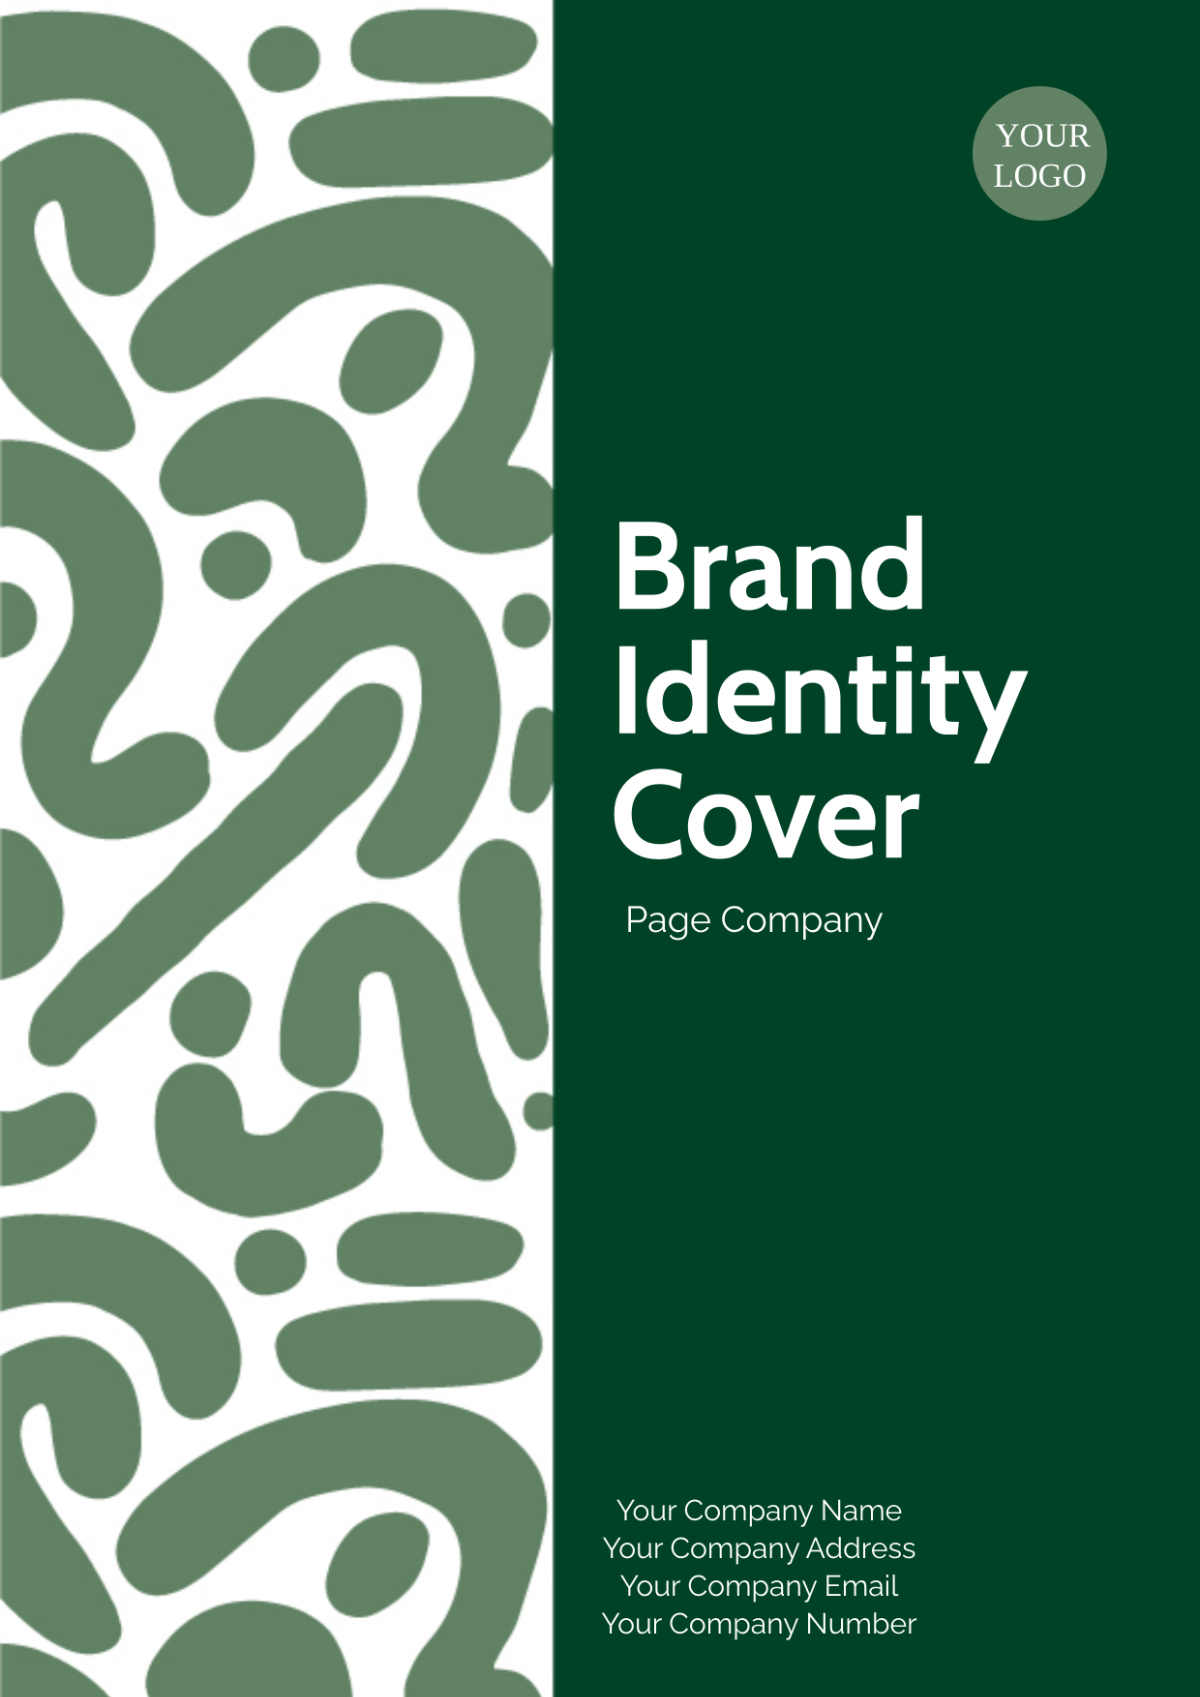 Brand Identity Cover Page Company